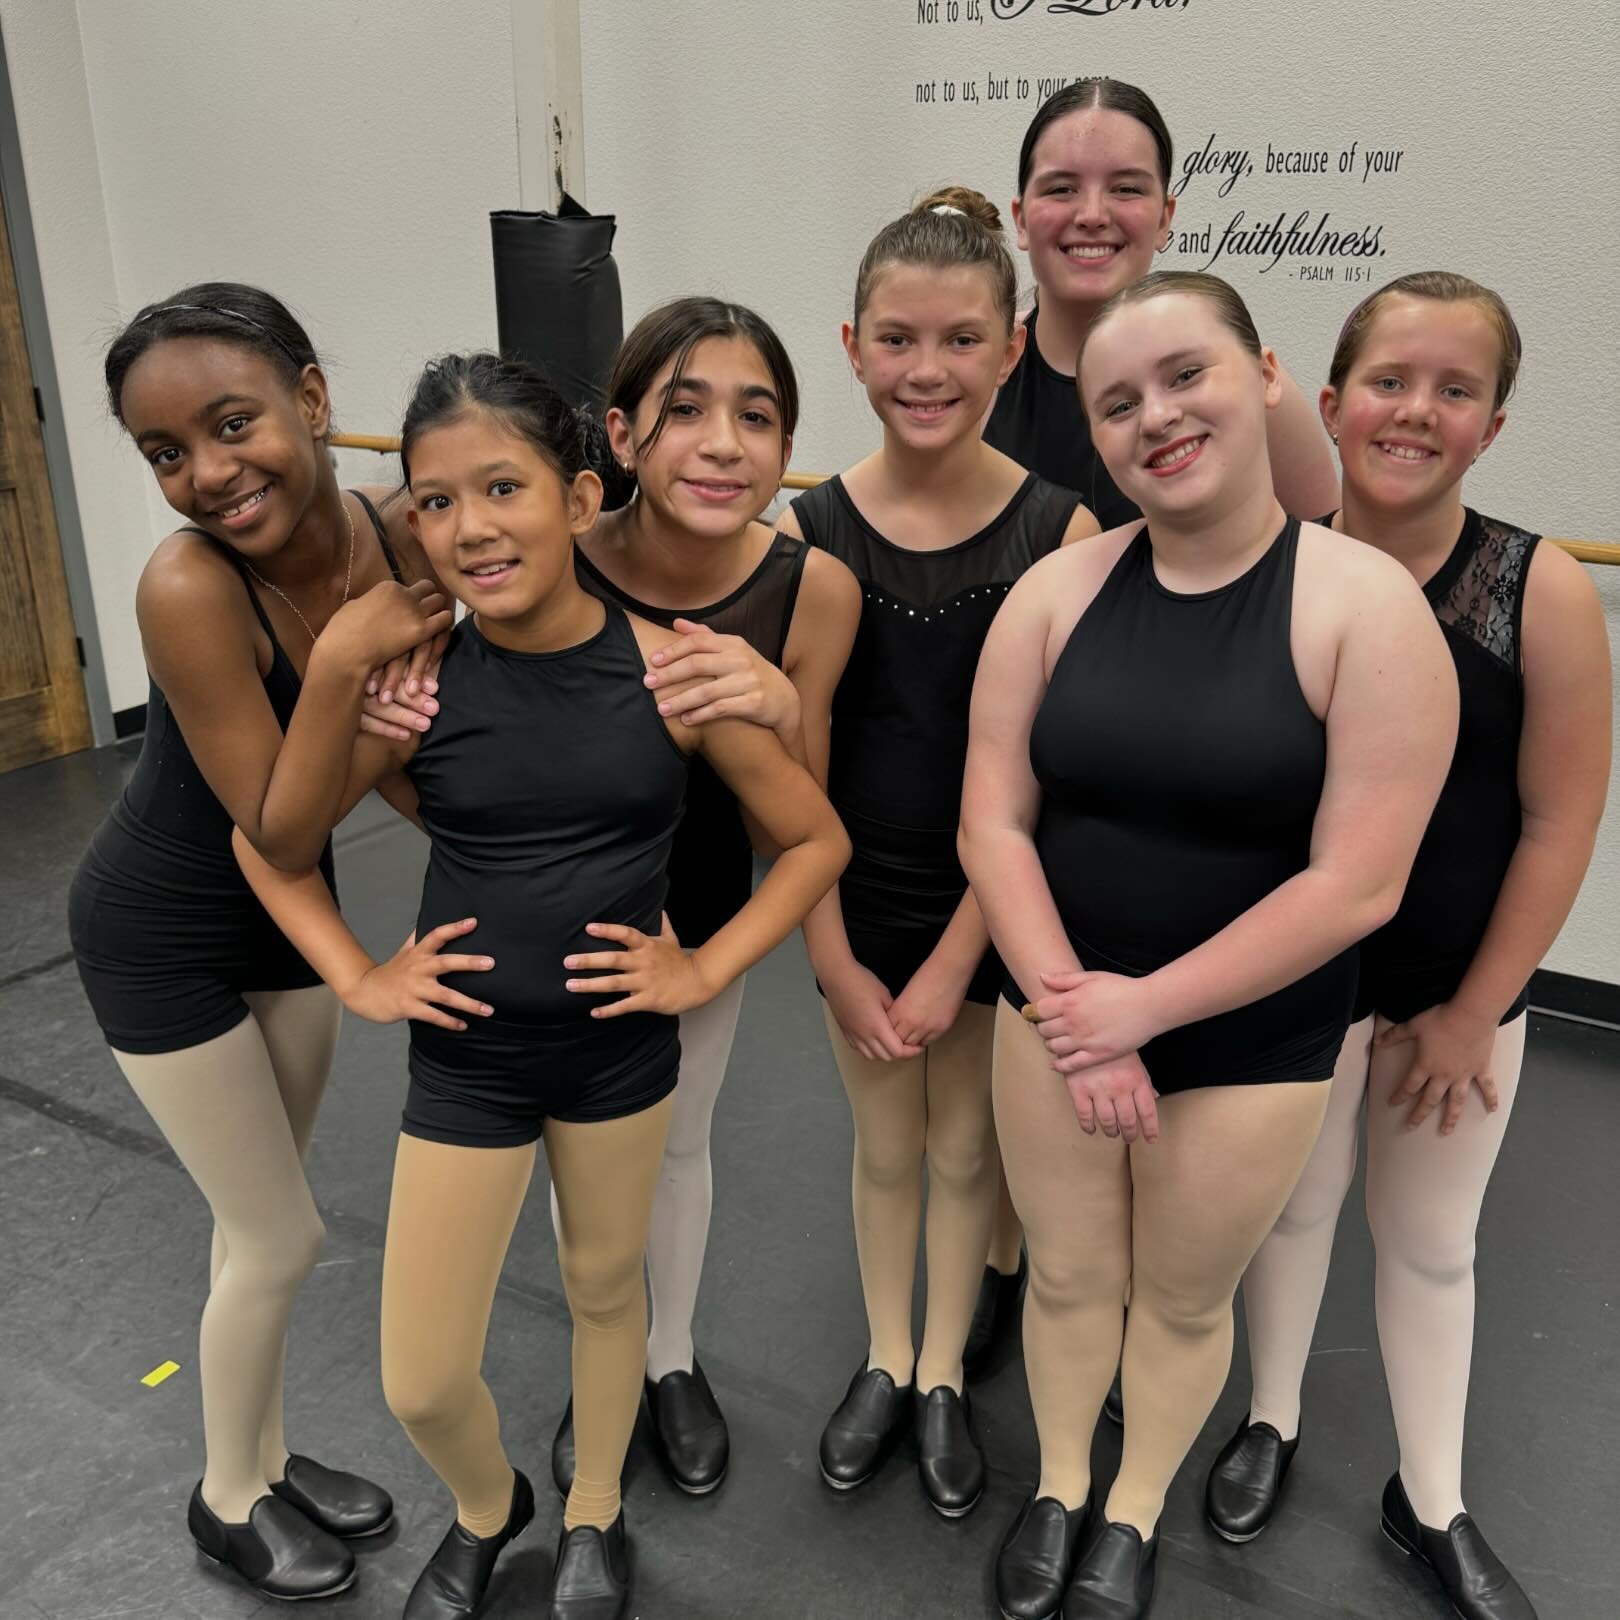 Summer season is upon us! Sign up for your favorite classes with your favorite friends before spaces fill up! SODC offers dance for ages 18 months to 18 years. Summer programs begin June 3rd. Visit us online to register!